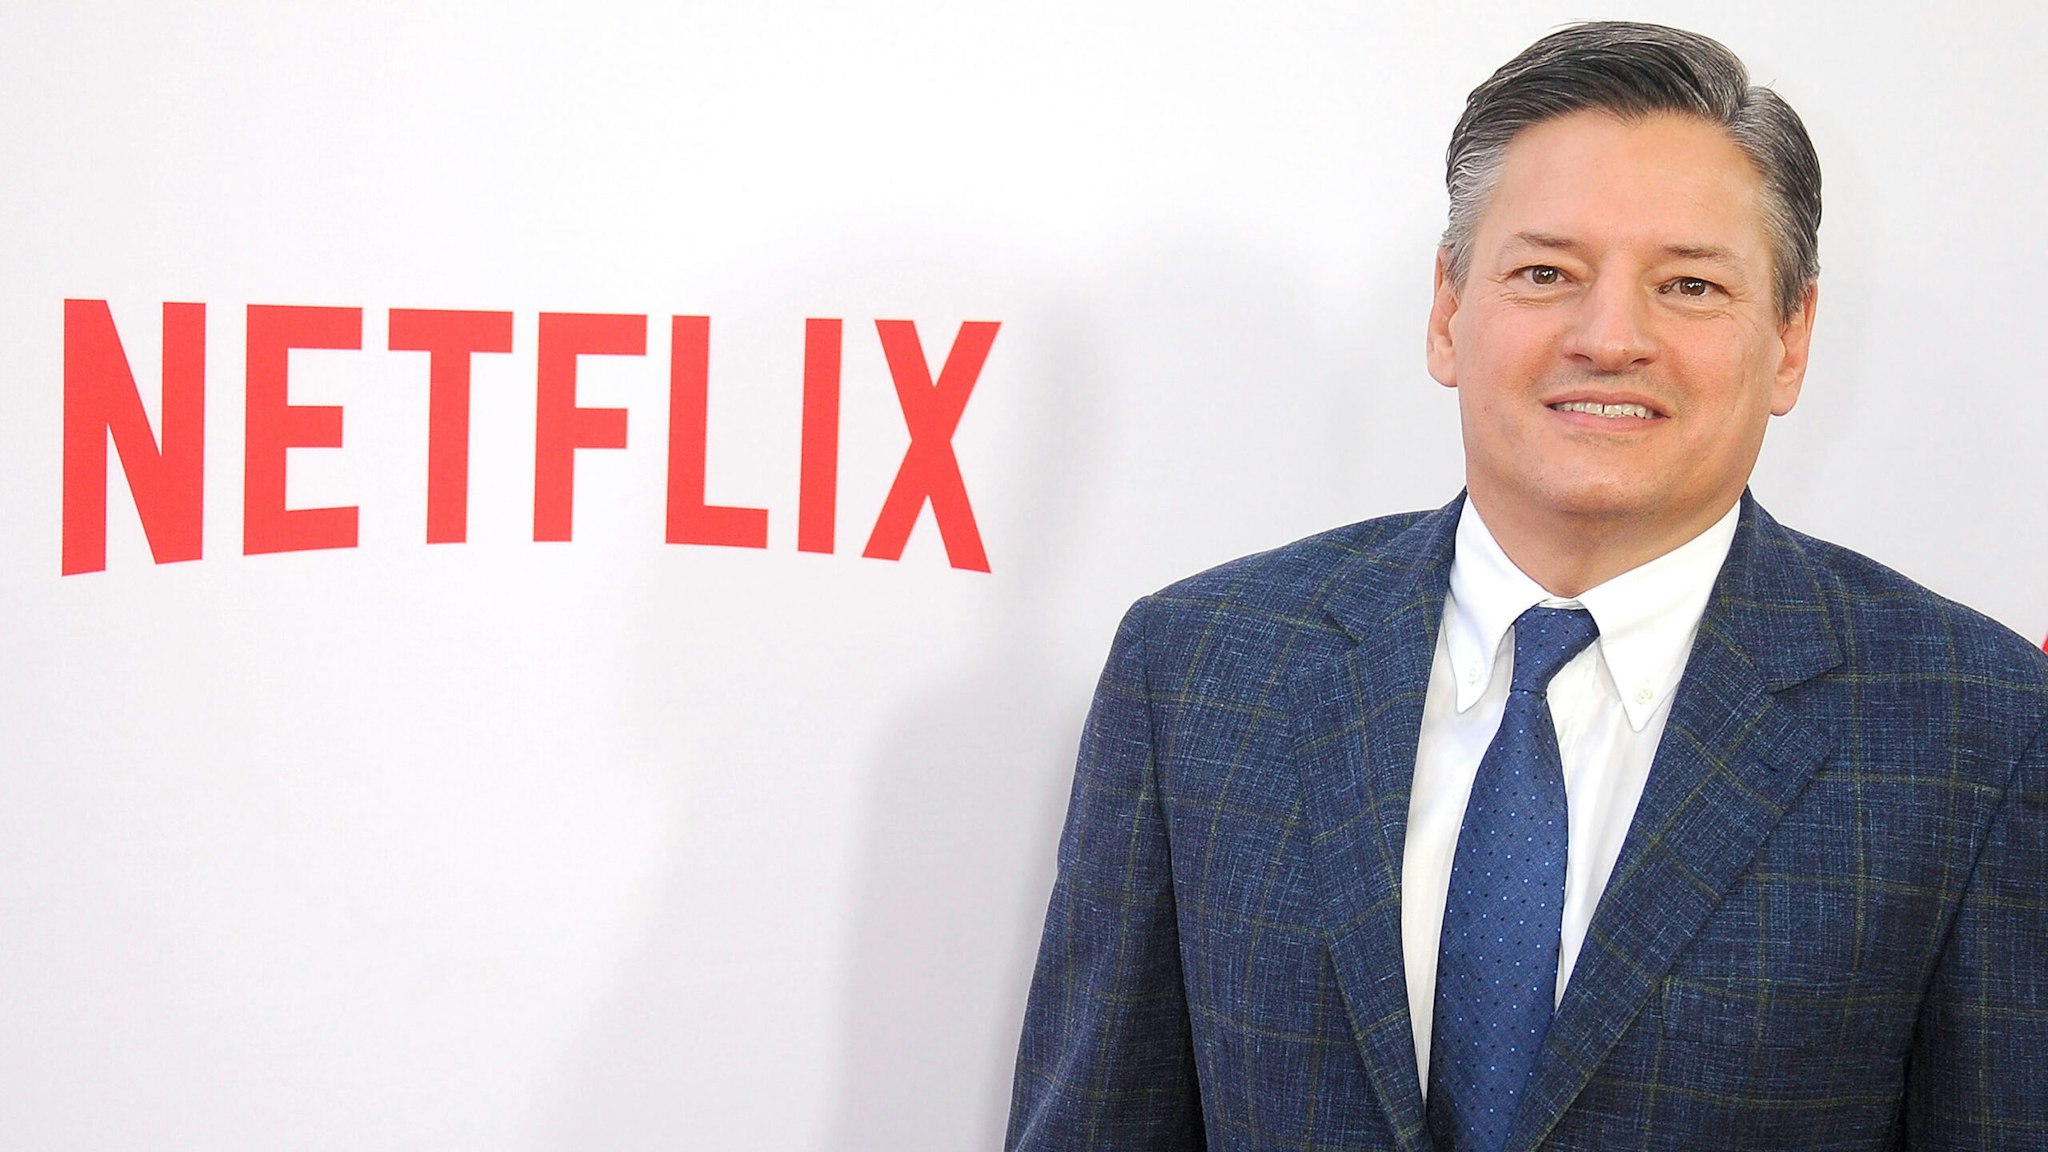 LOS ANGELES, CA - APRIL 02: Ted Sarandos of Netflix arrives at the premiere Of Netflix's "Marvel's Daredevil" at Regal Cinemas L.A. Live on April 2, 2015 in Los Angeles, California.